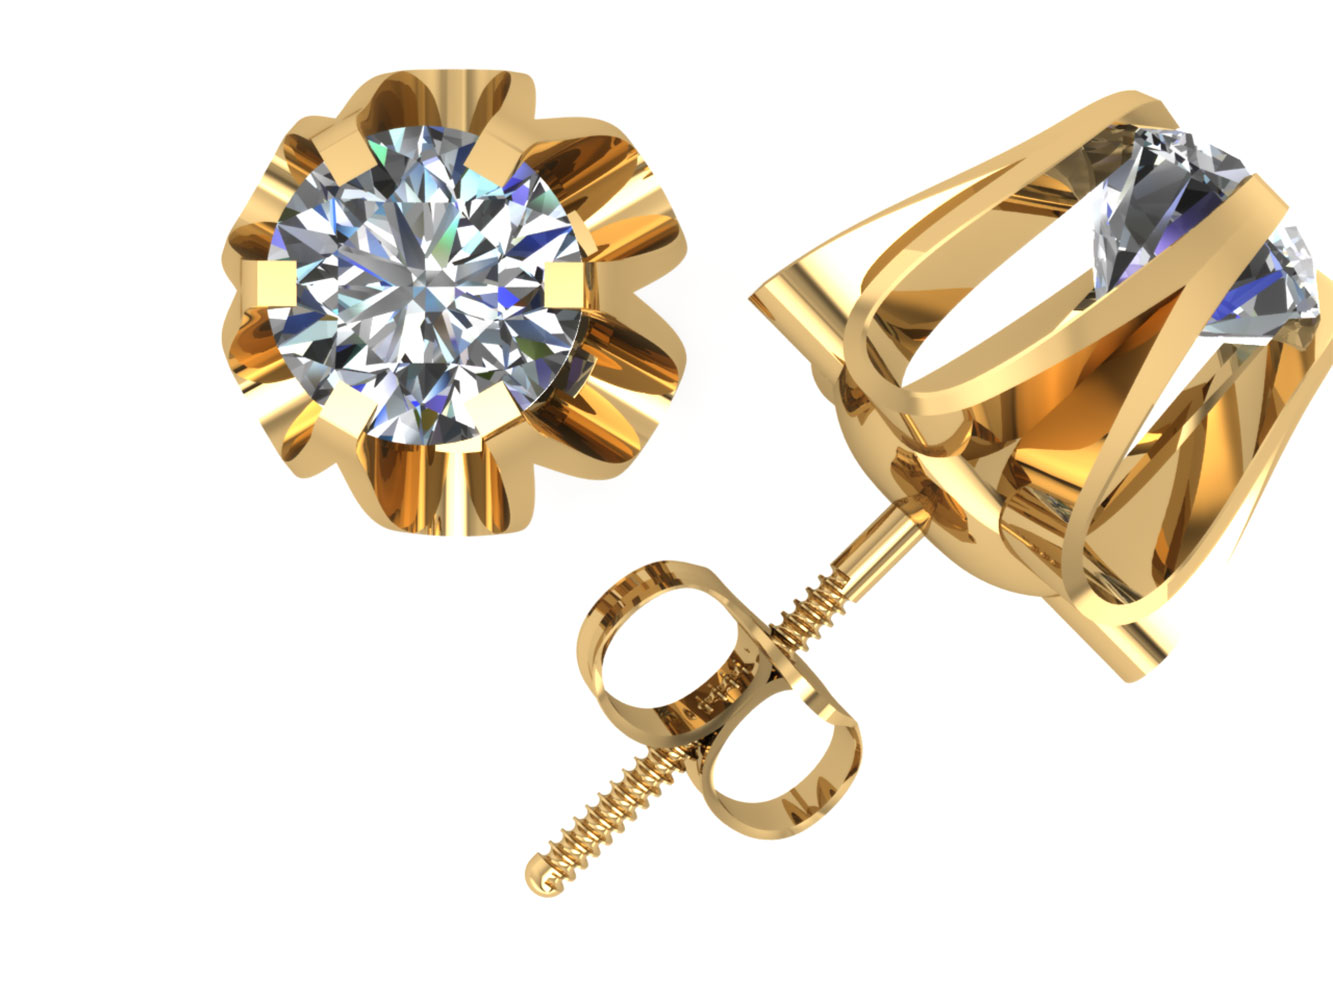 Jewel We Sell Real 1.00Ct Round Cut Diamond Buttercup Stud Earrings 14k White or Yellow Gold 6Prong Set E VS1